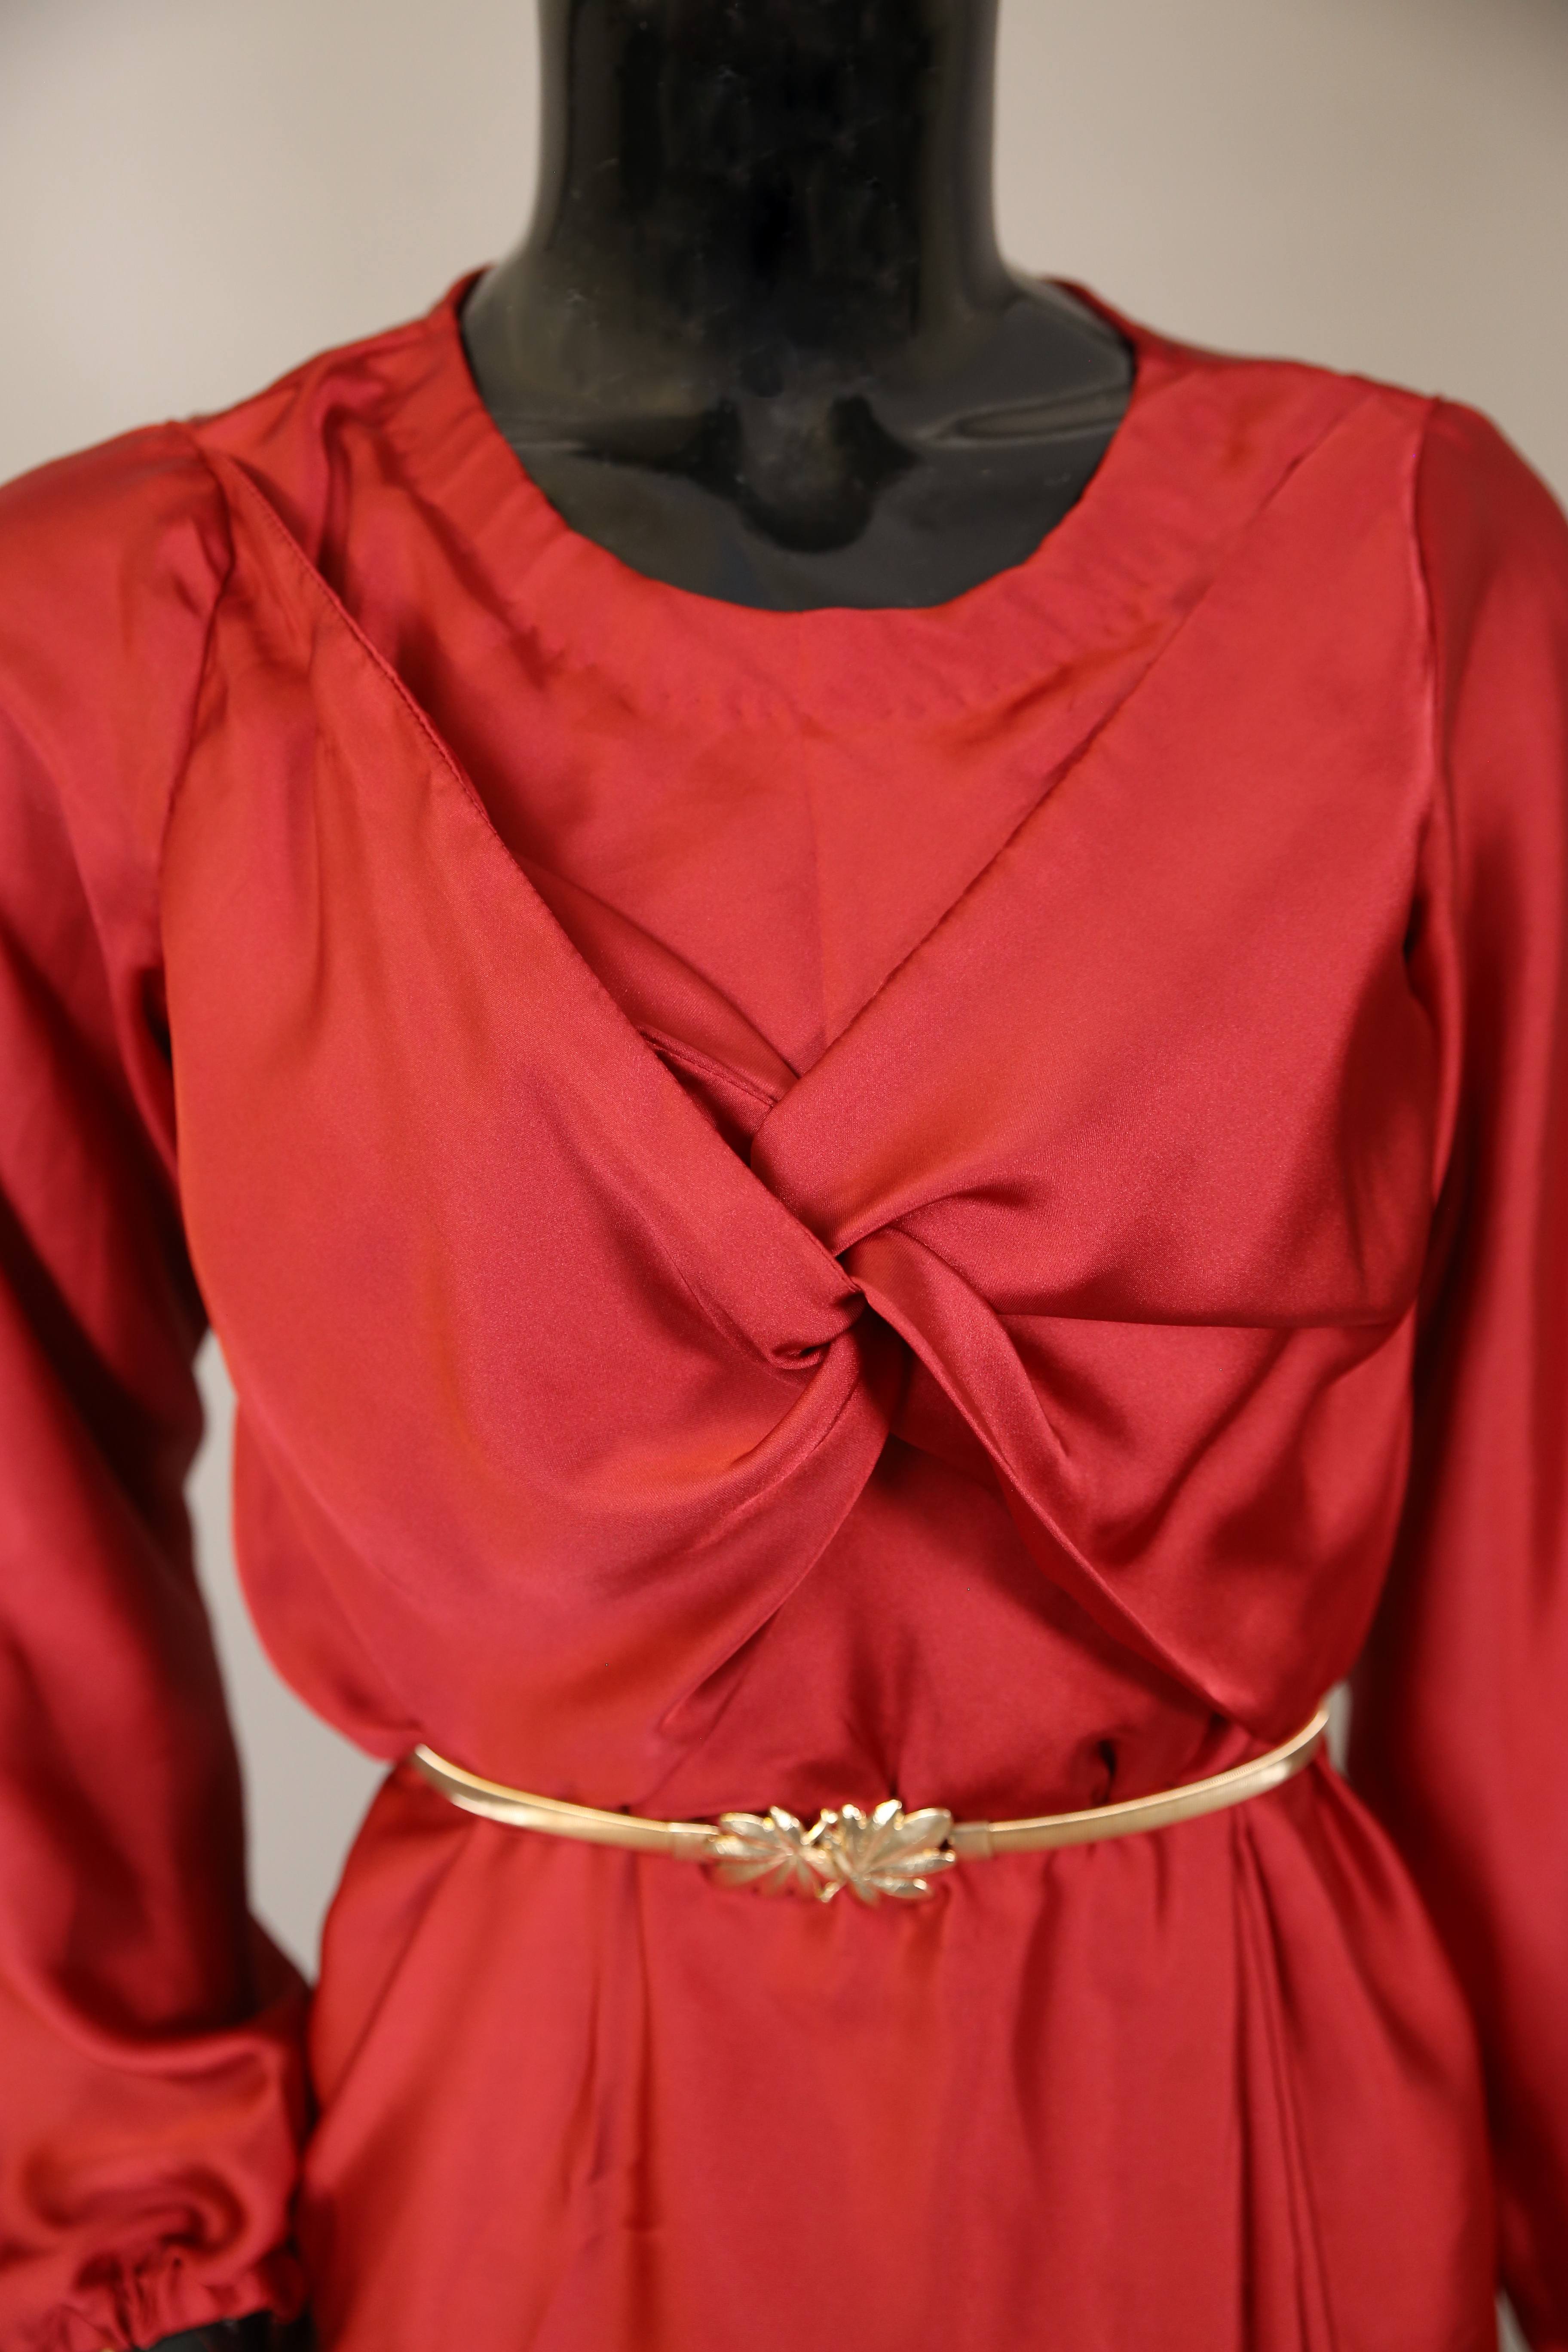 Orchid- Stunning Satin maxi dress with front knot detailing and belt embellishment- Blood red